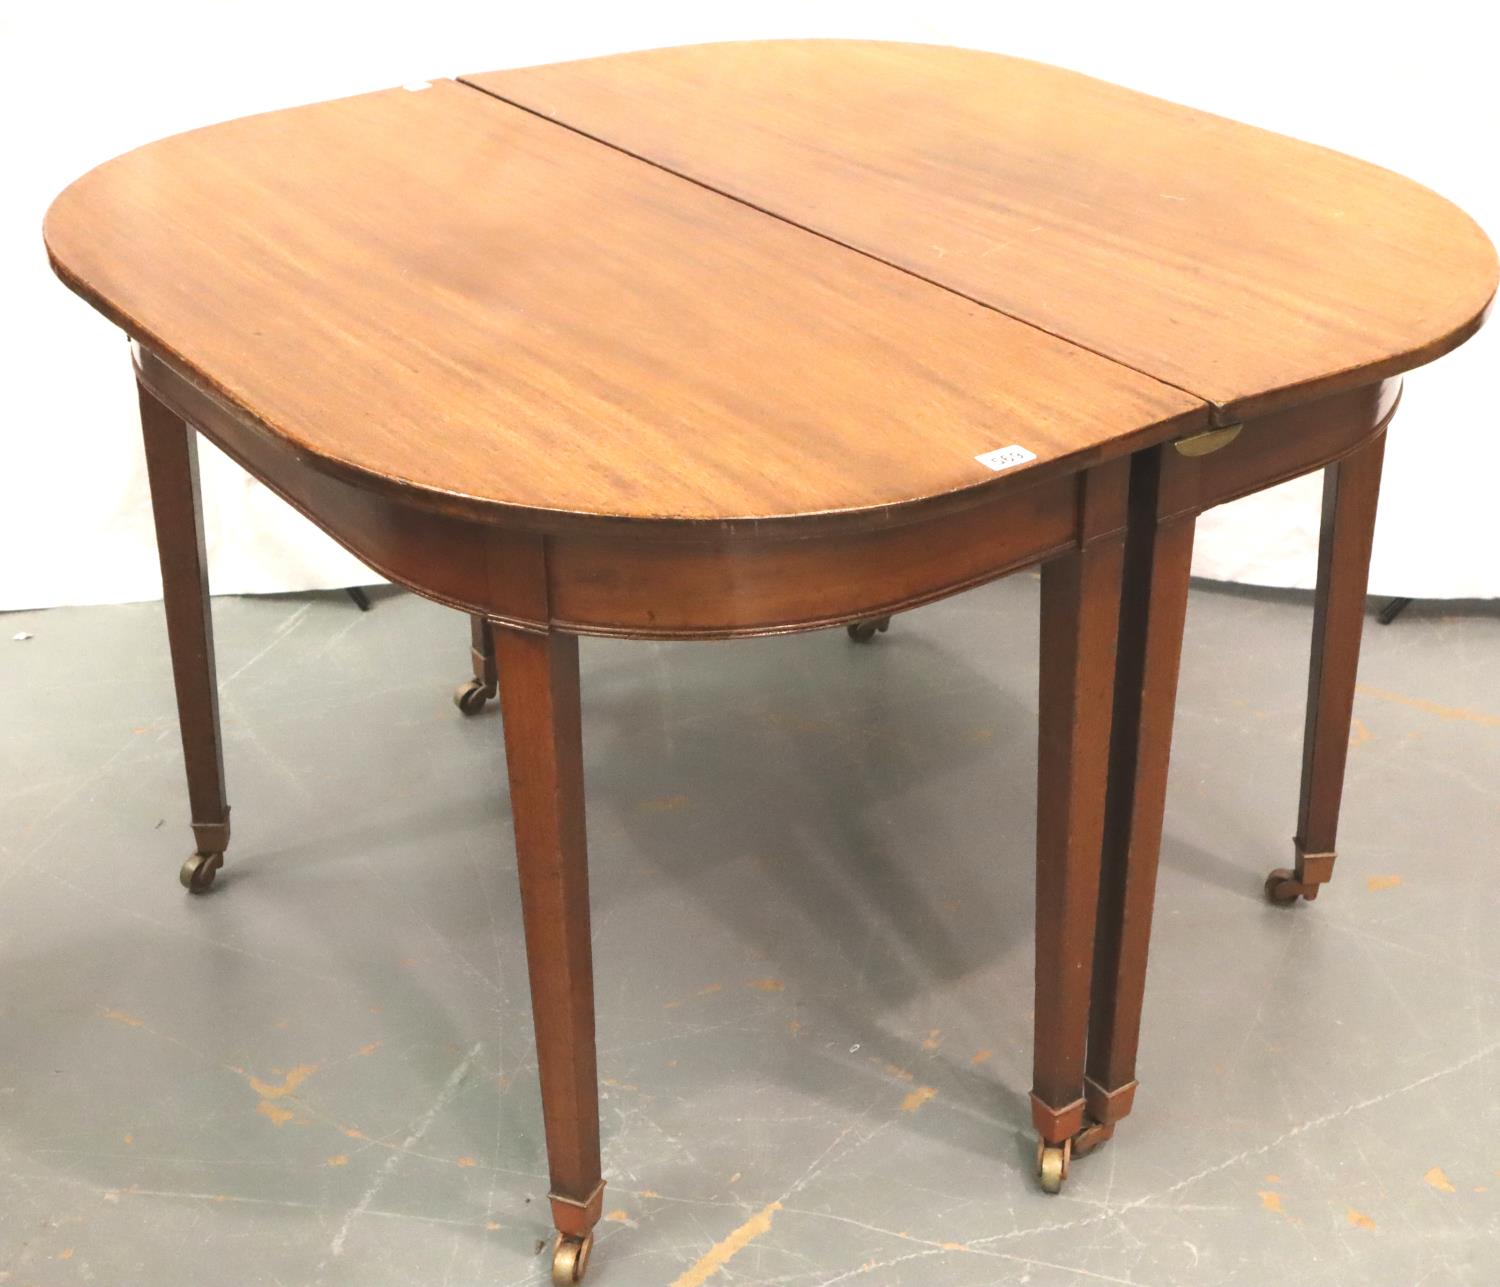 A George III mahogany extending dining table raised on tapering supports, 175 x 114 x 75 cm H. Not